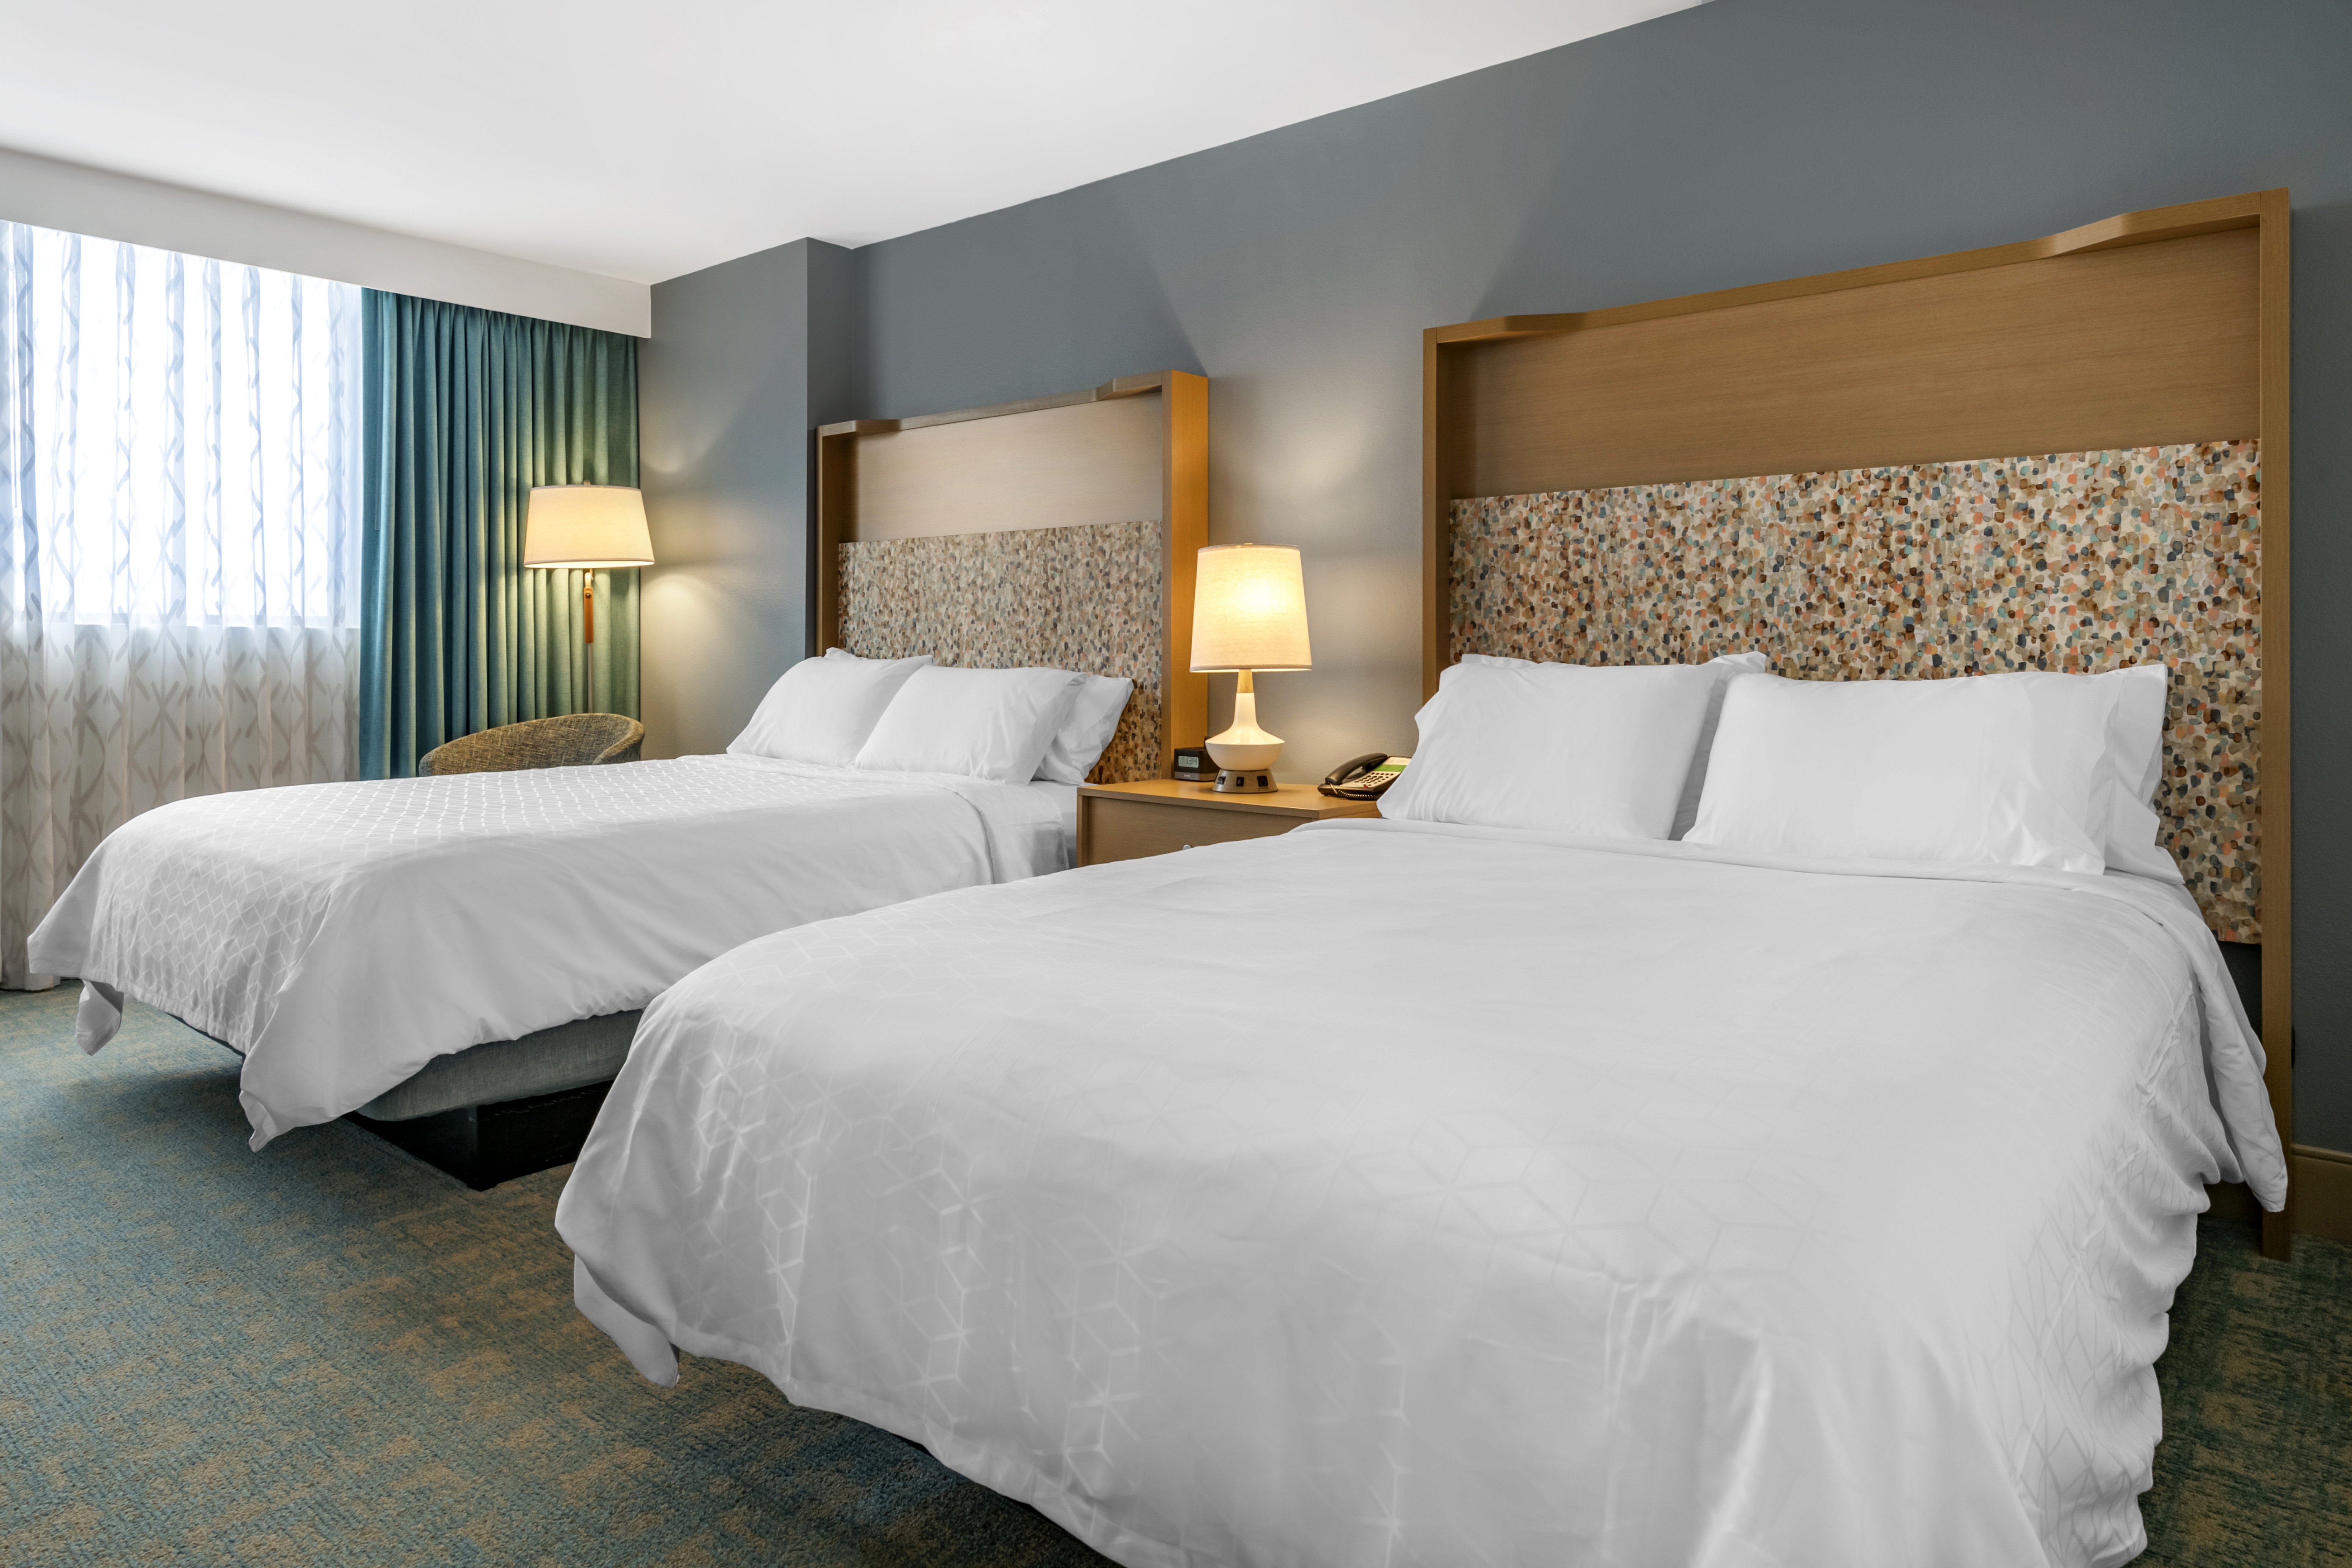 Official Walt Disney World Hotel with Modern, Spacious Guest Rooms